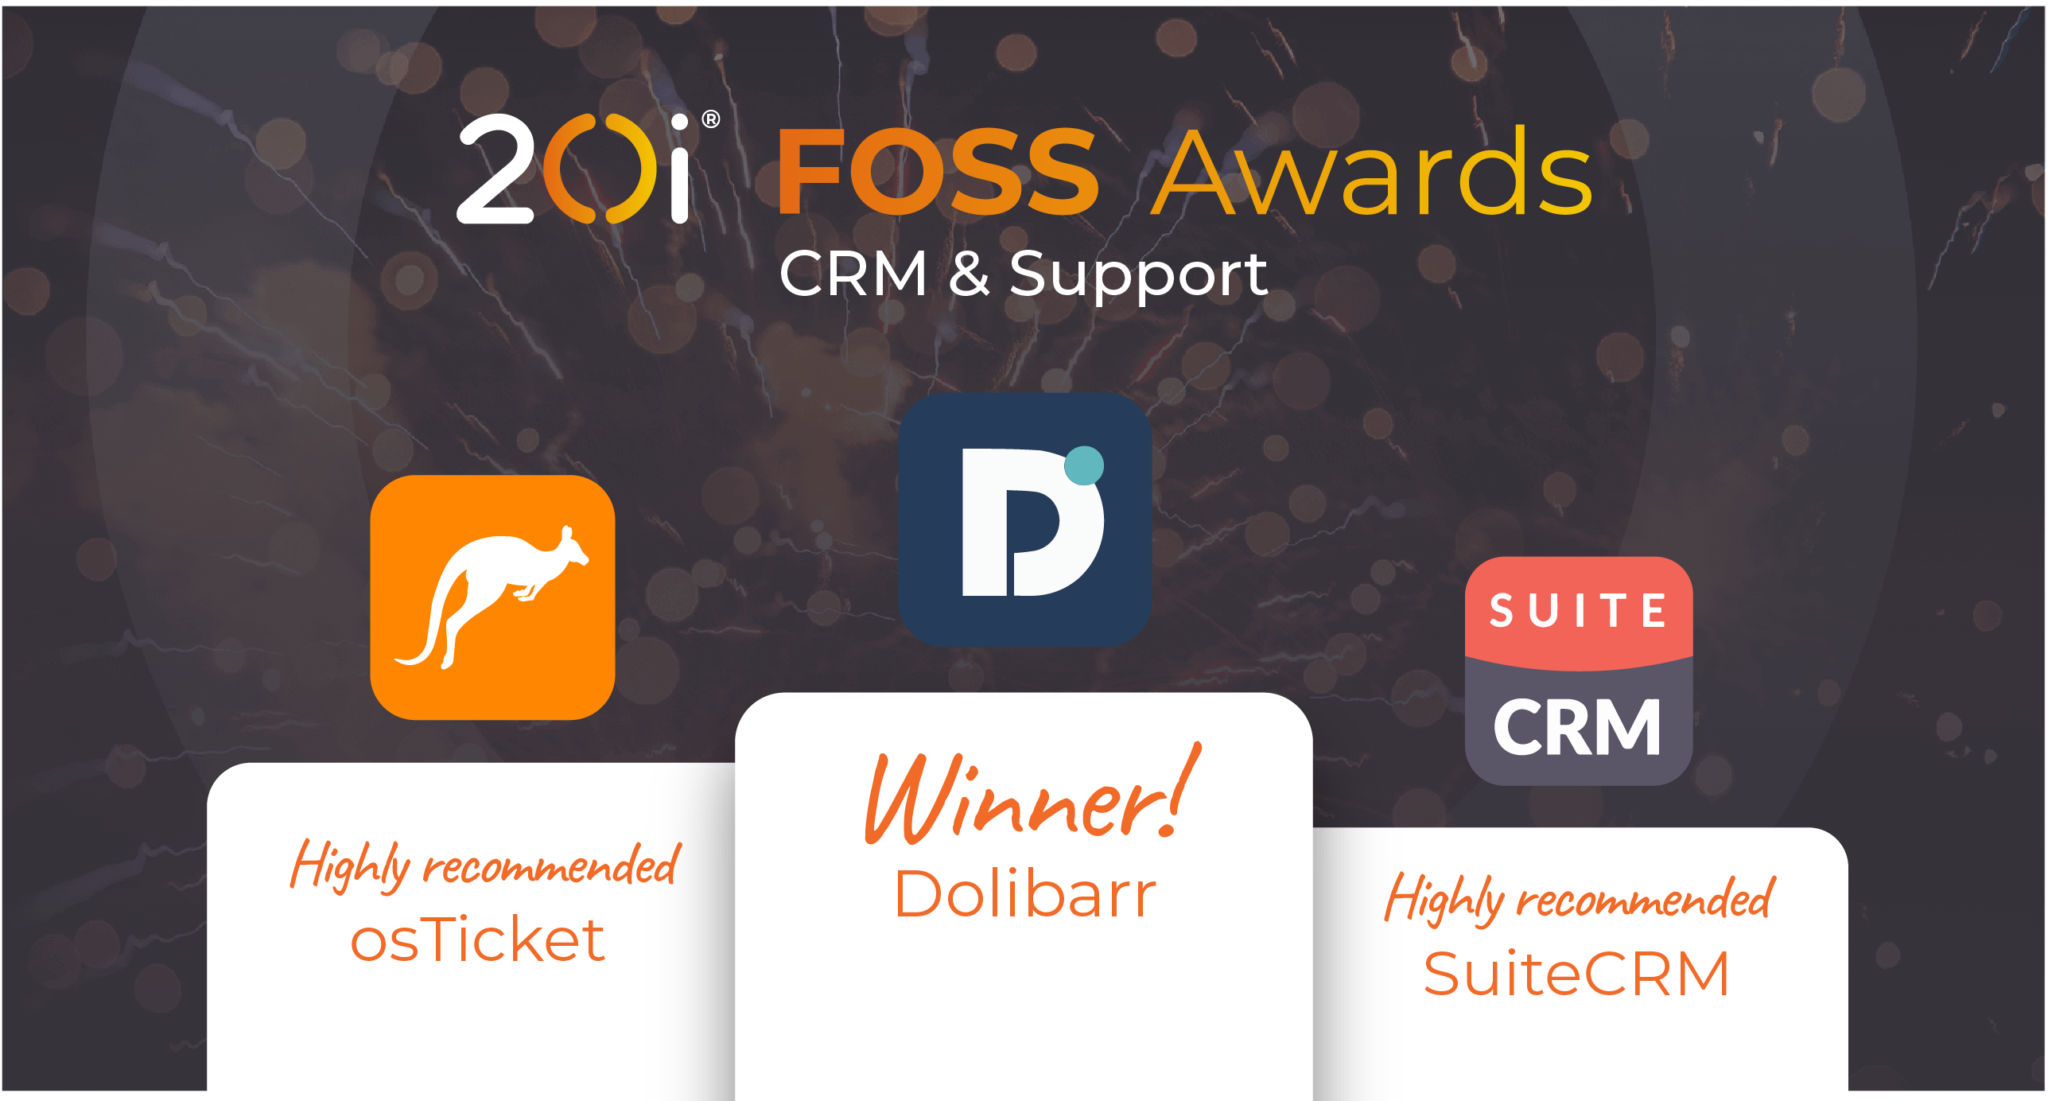 20i foss awards winners 2023 - CRM & support category